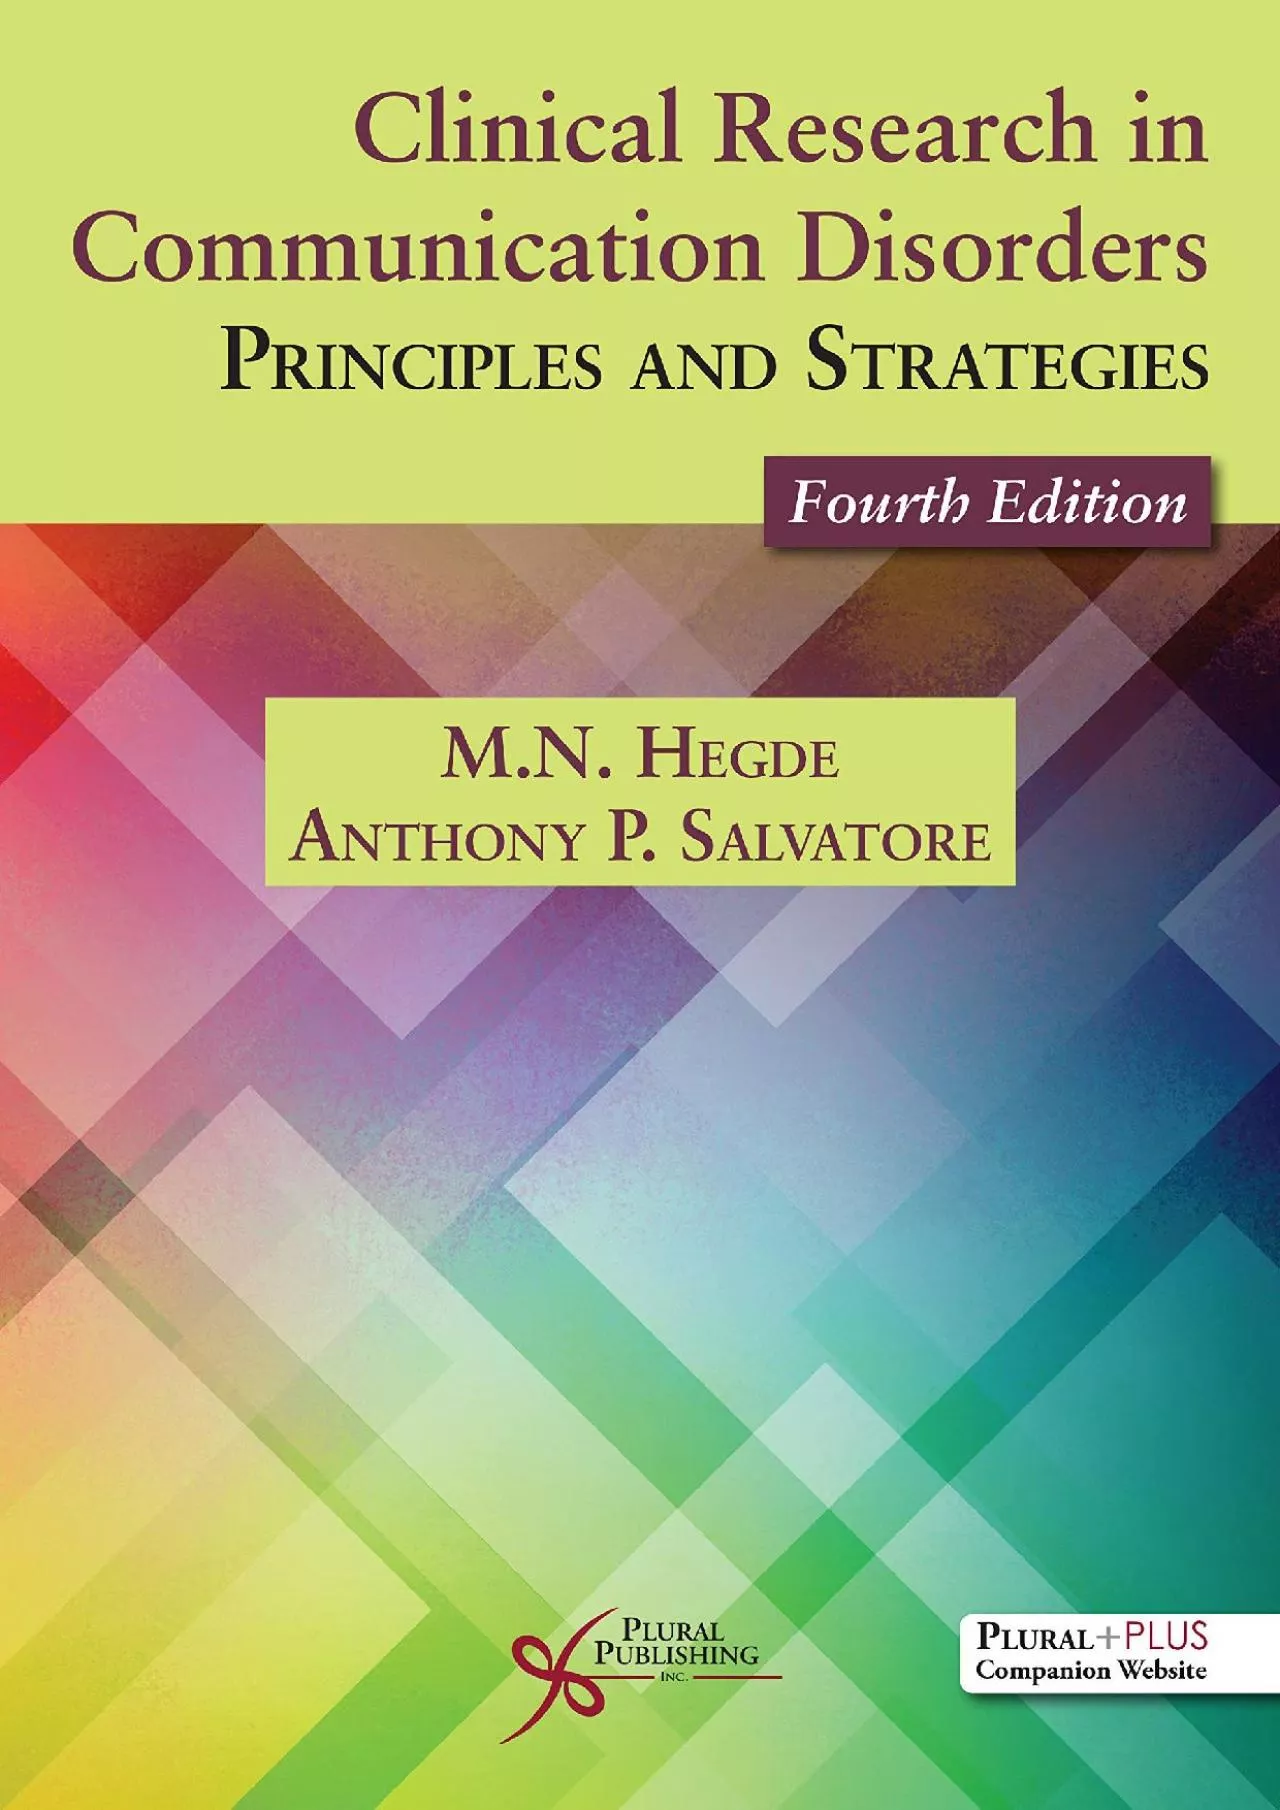 (BOOK)-Clinical Research in Communication Disorders: Principles and Strategies, Fourth